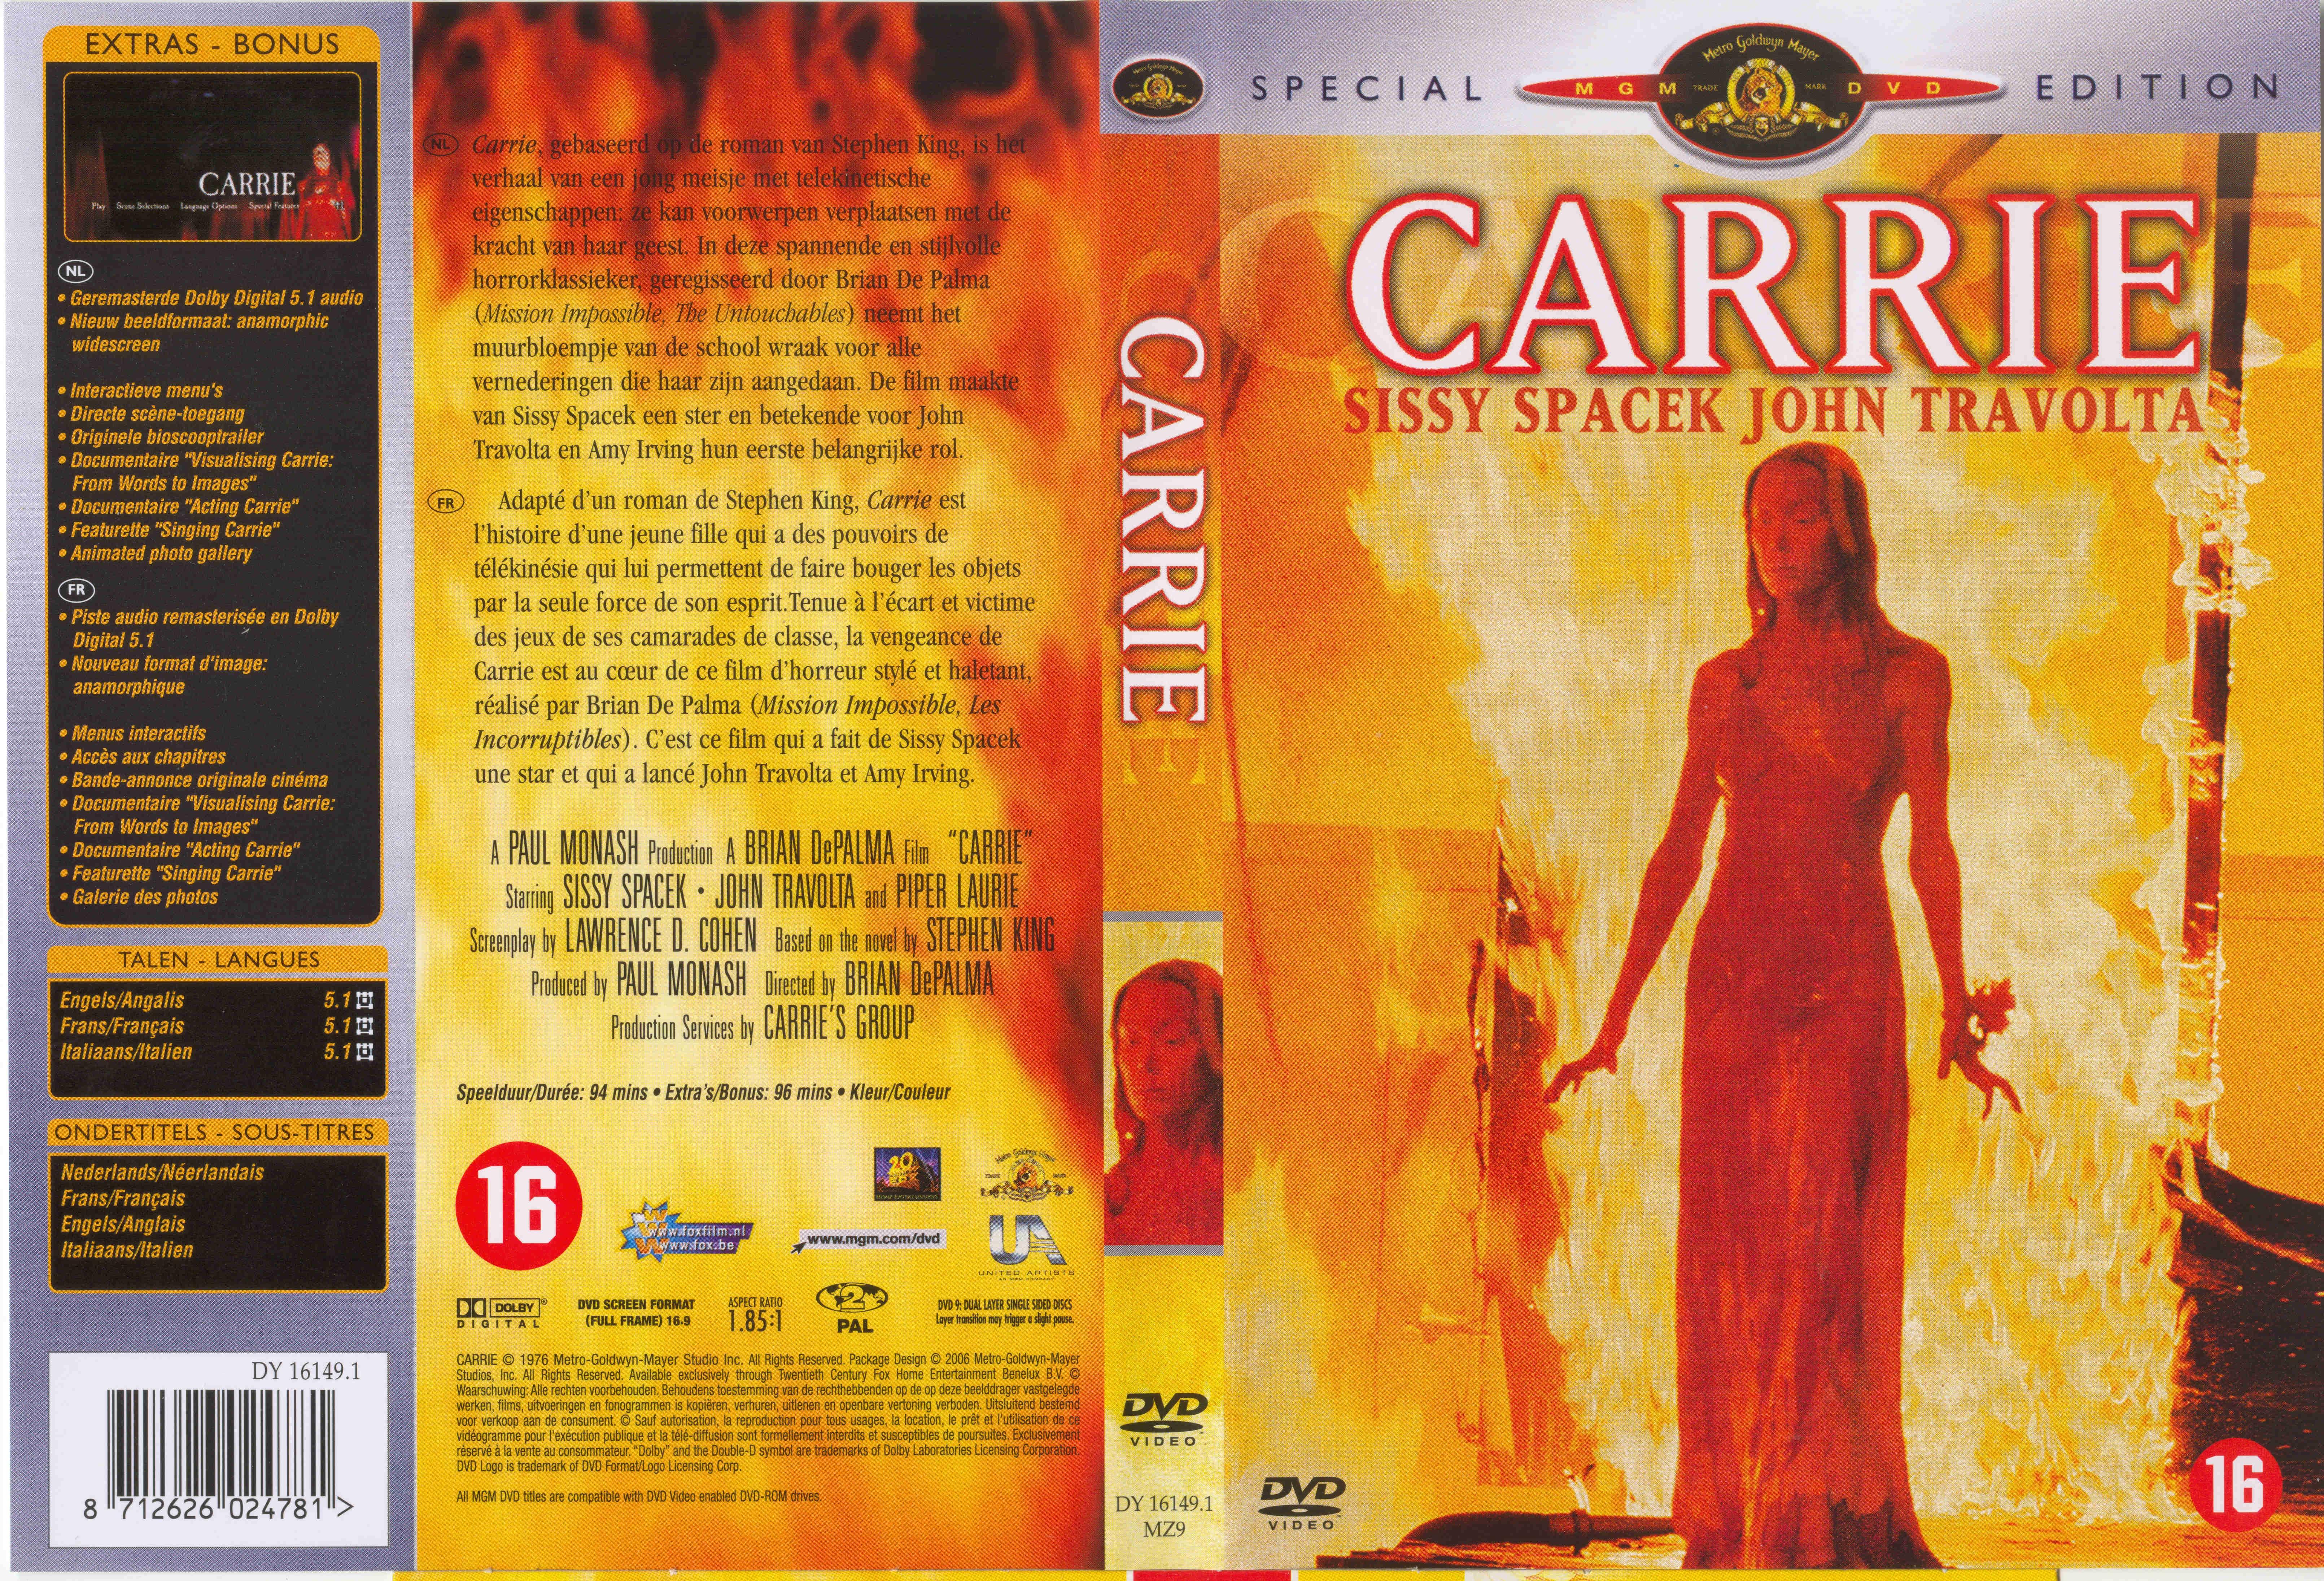 Jaquette DVD Carrie v2